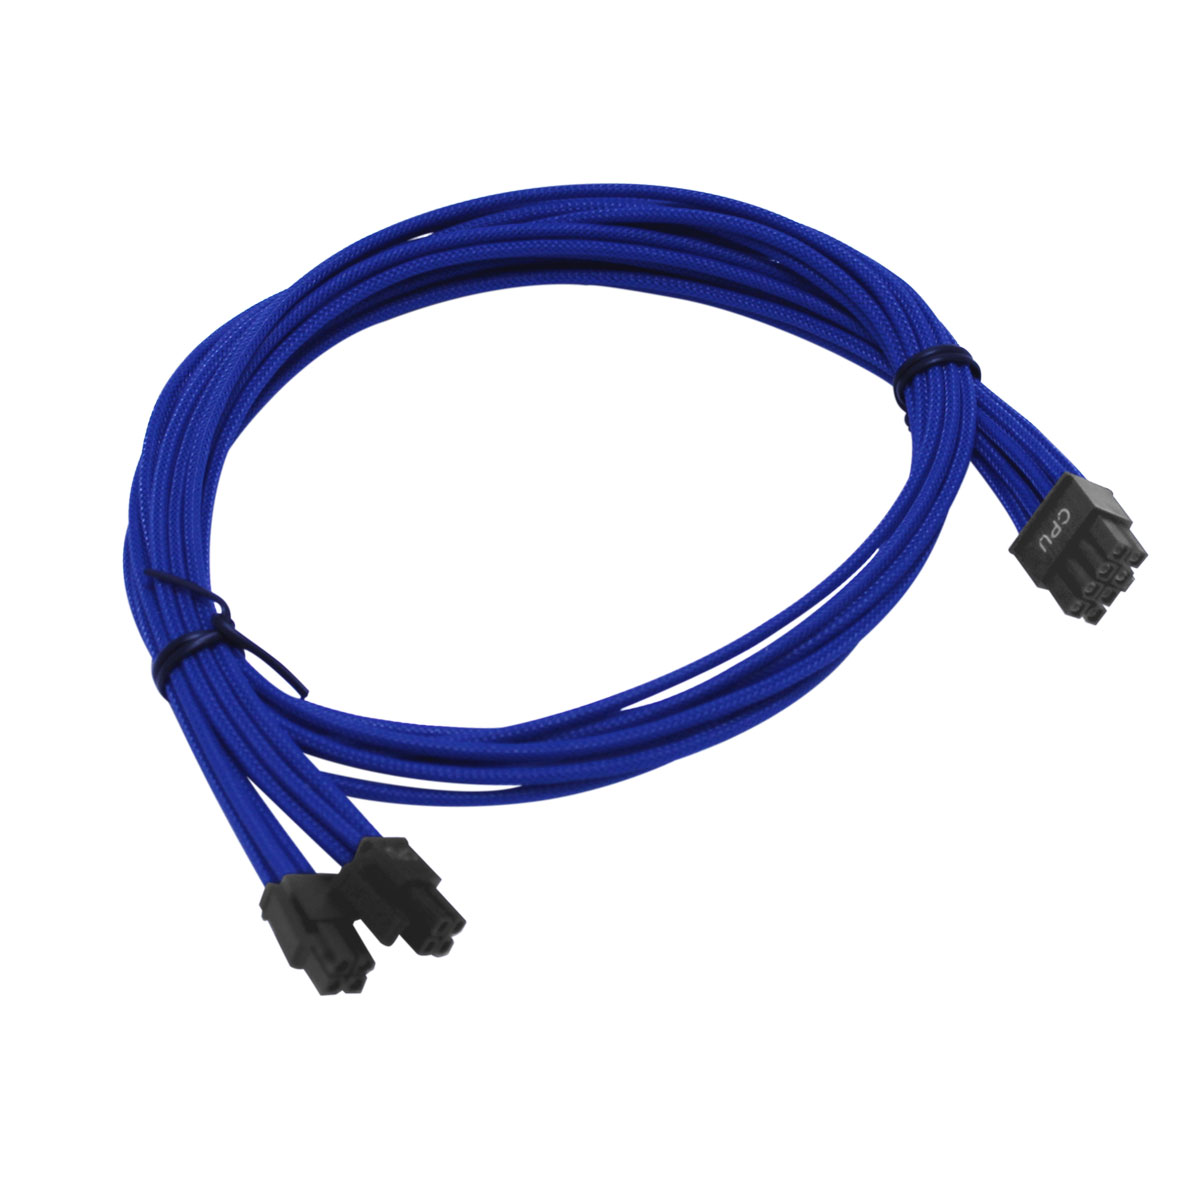 Evga Products B3 B5 G2 G3 G5 Gp Gm Pq P2 T2 Blue Power Supply Cable Set Individually Sleeved 100 Cu 1300 B9